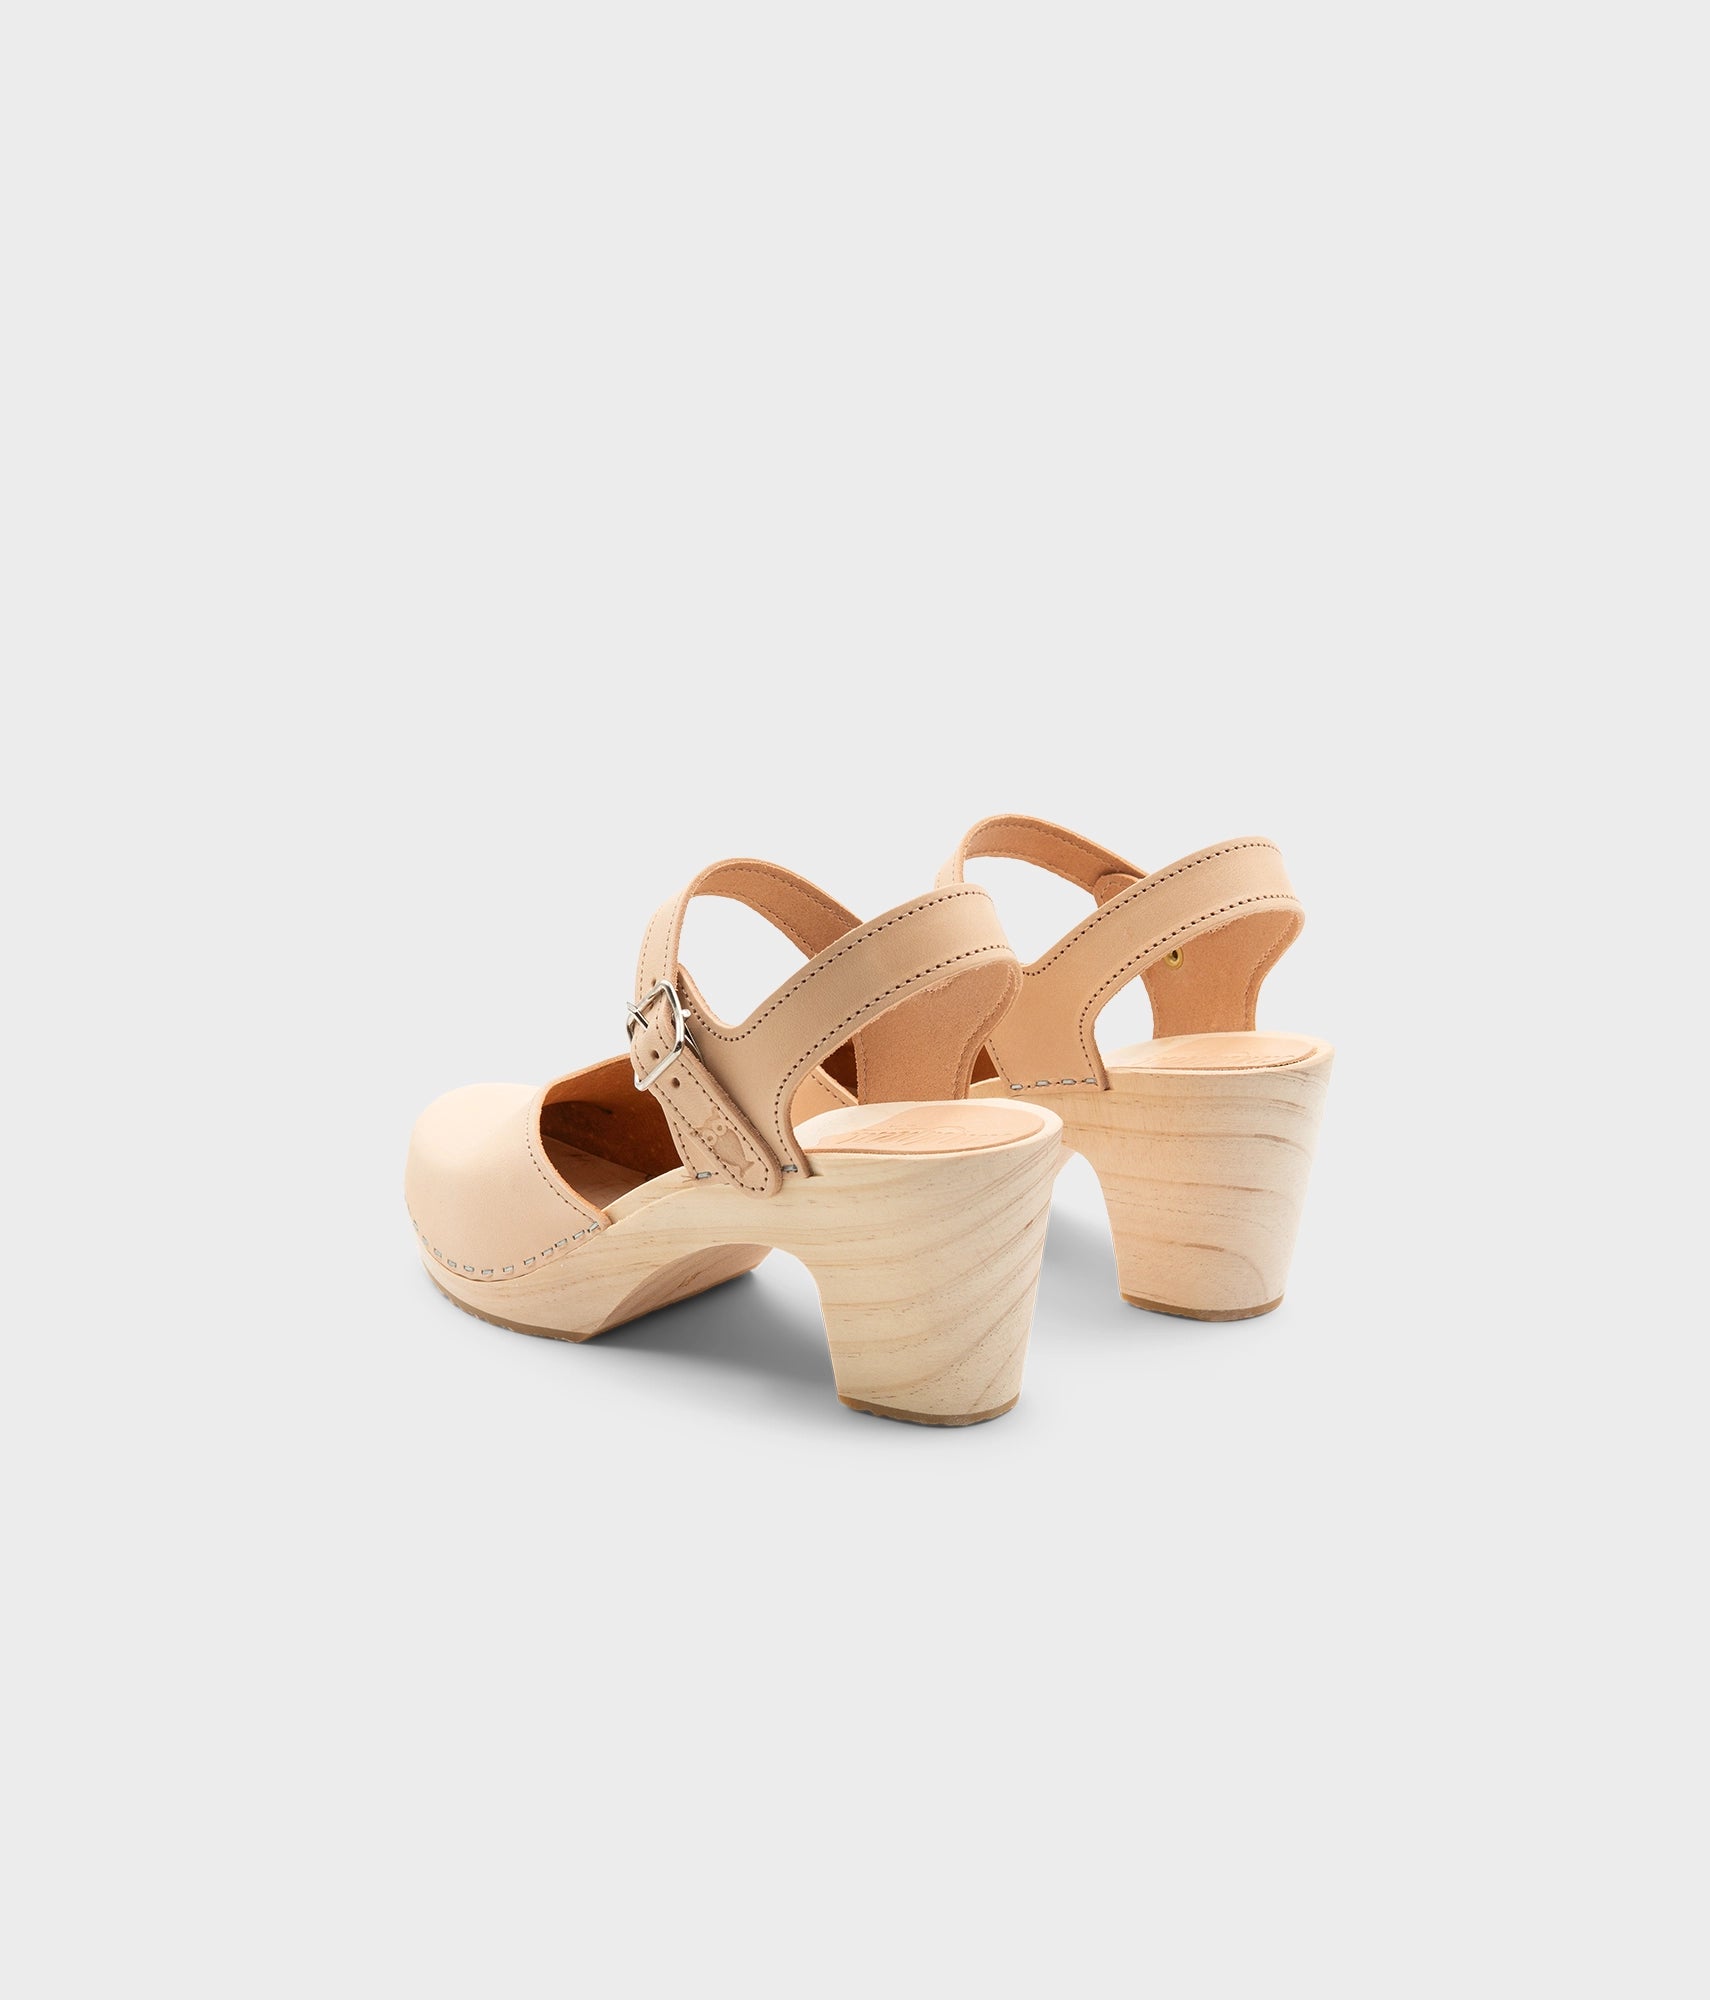 High rise heel classic clog sandals in ecru beige vegetable tanned leather stapled on a light wooden base